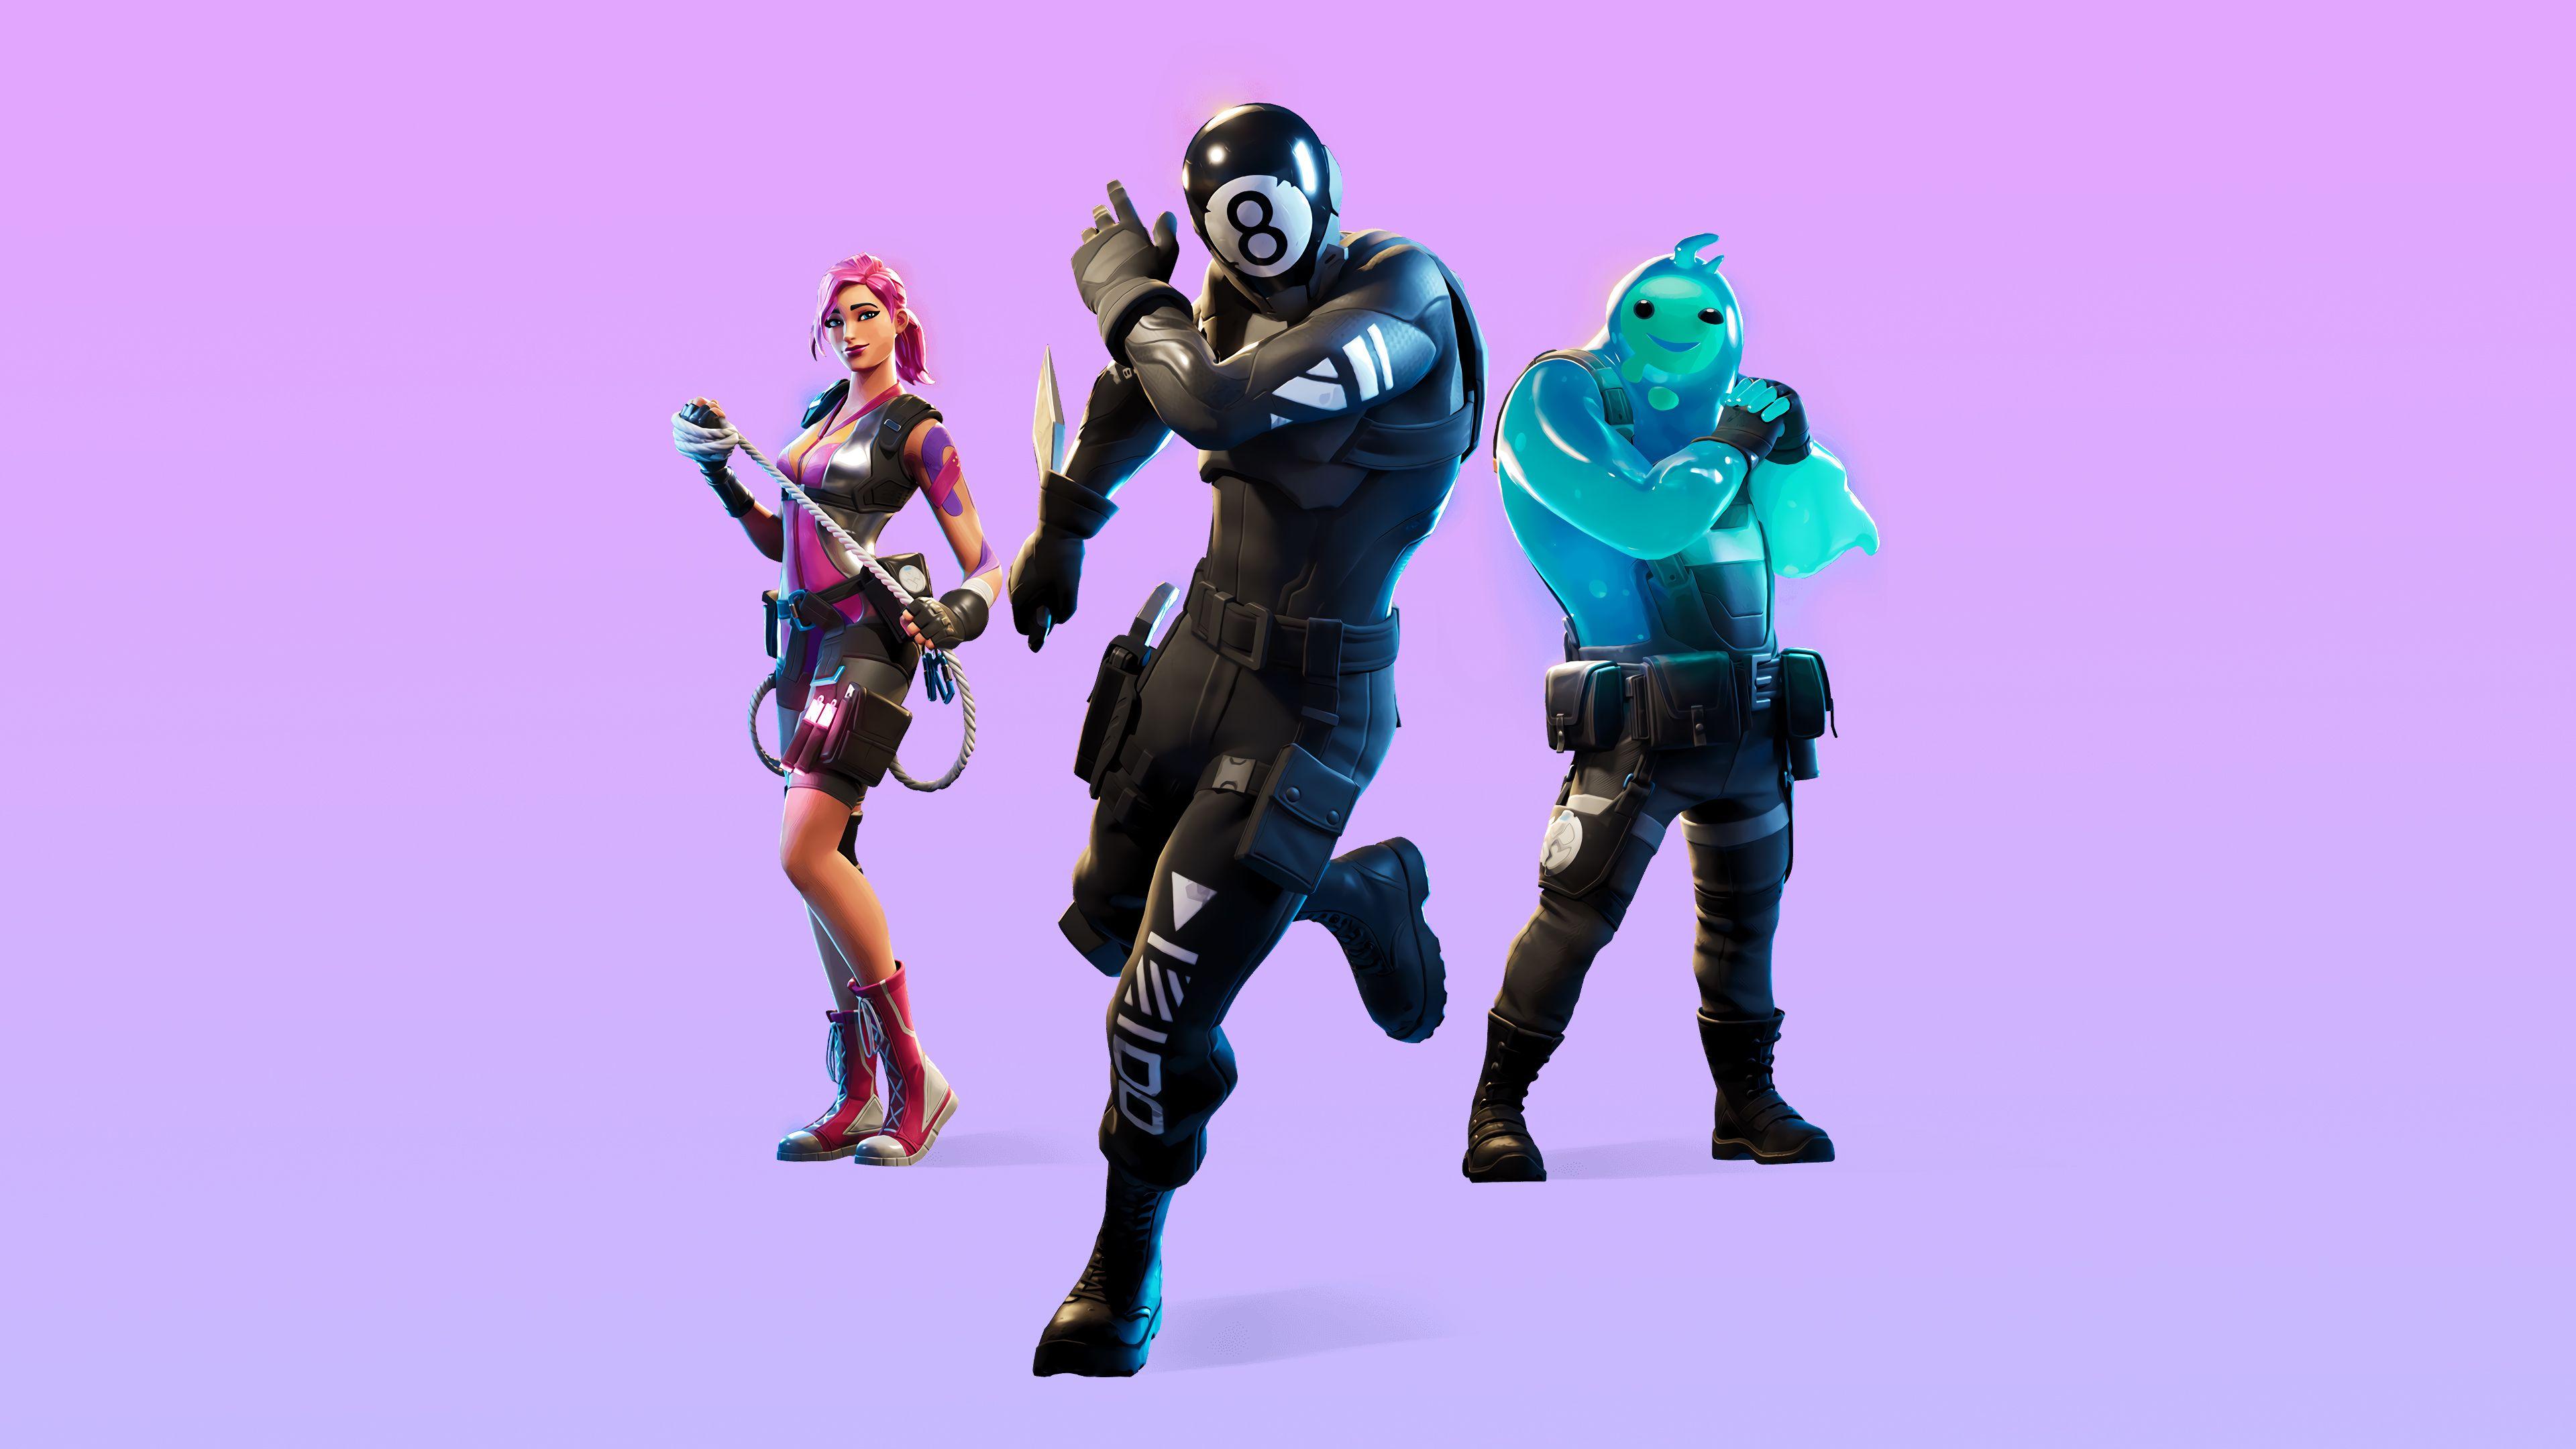 Fortnite Chapter 2 Wallpapers Top Free Fortnite Chapter 2